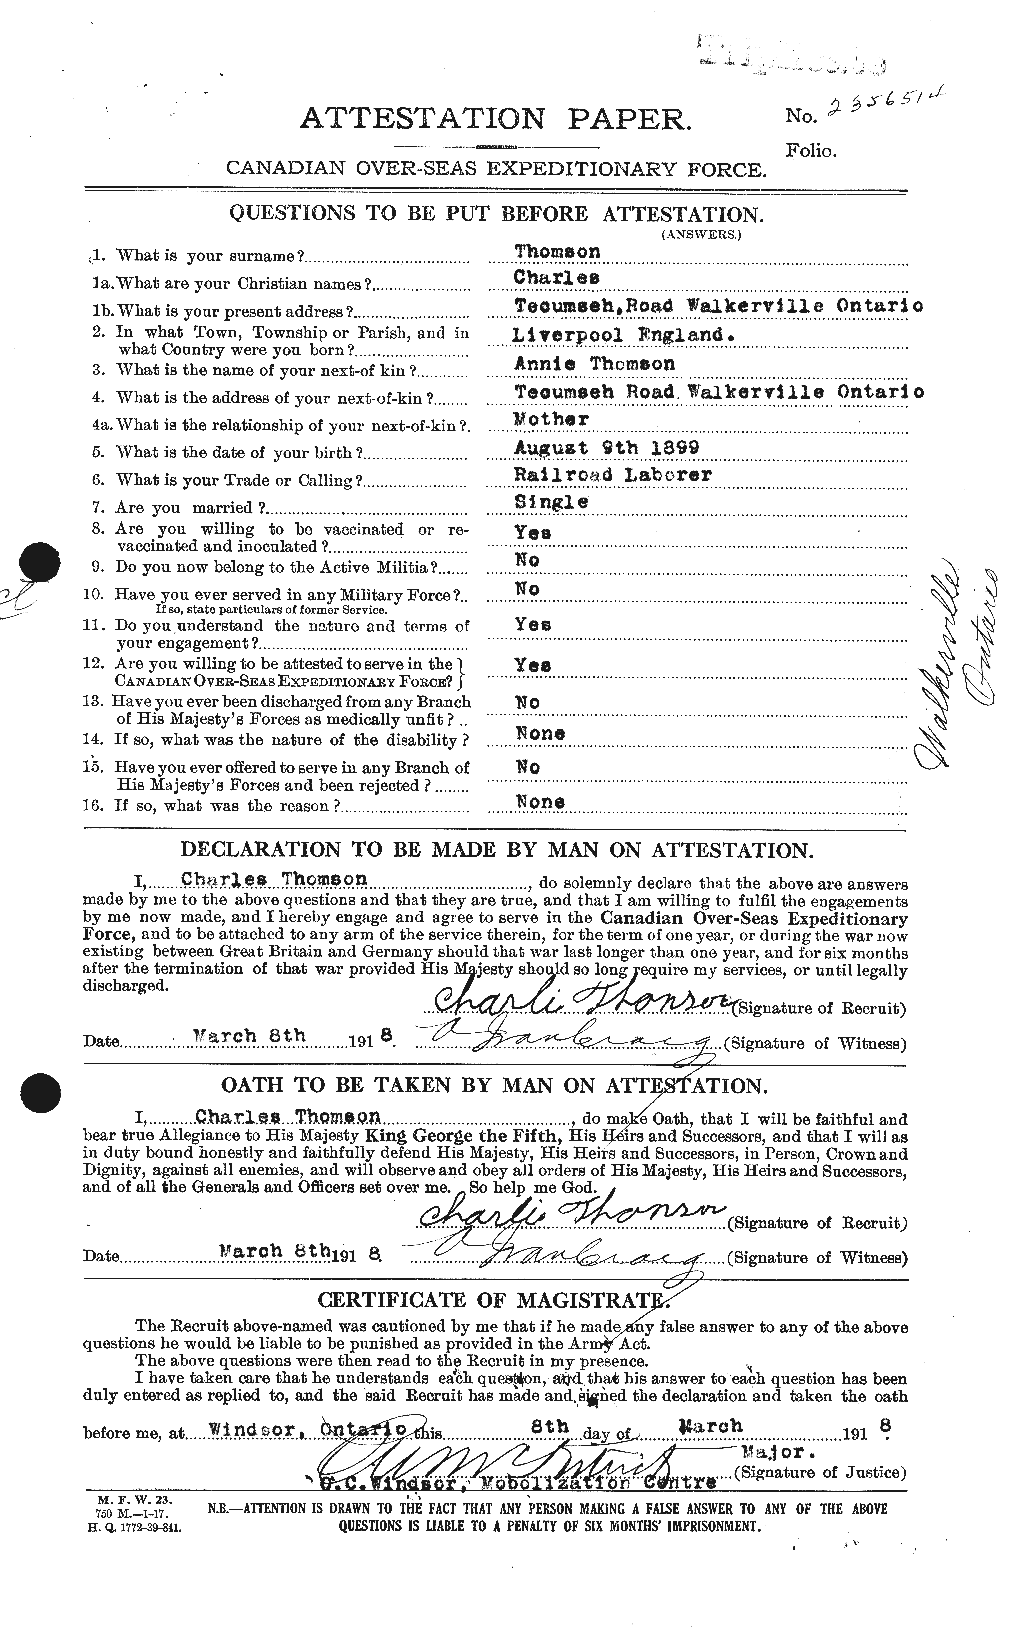 Personnel Records of the First World War - CEF 632296a